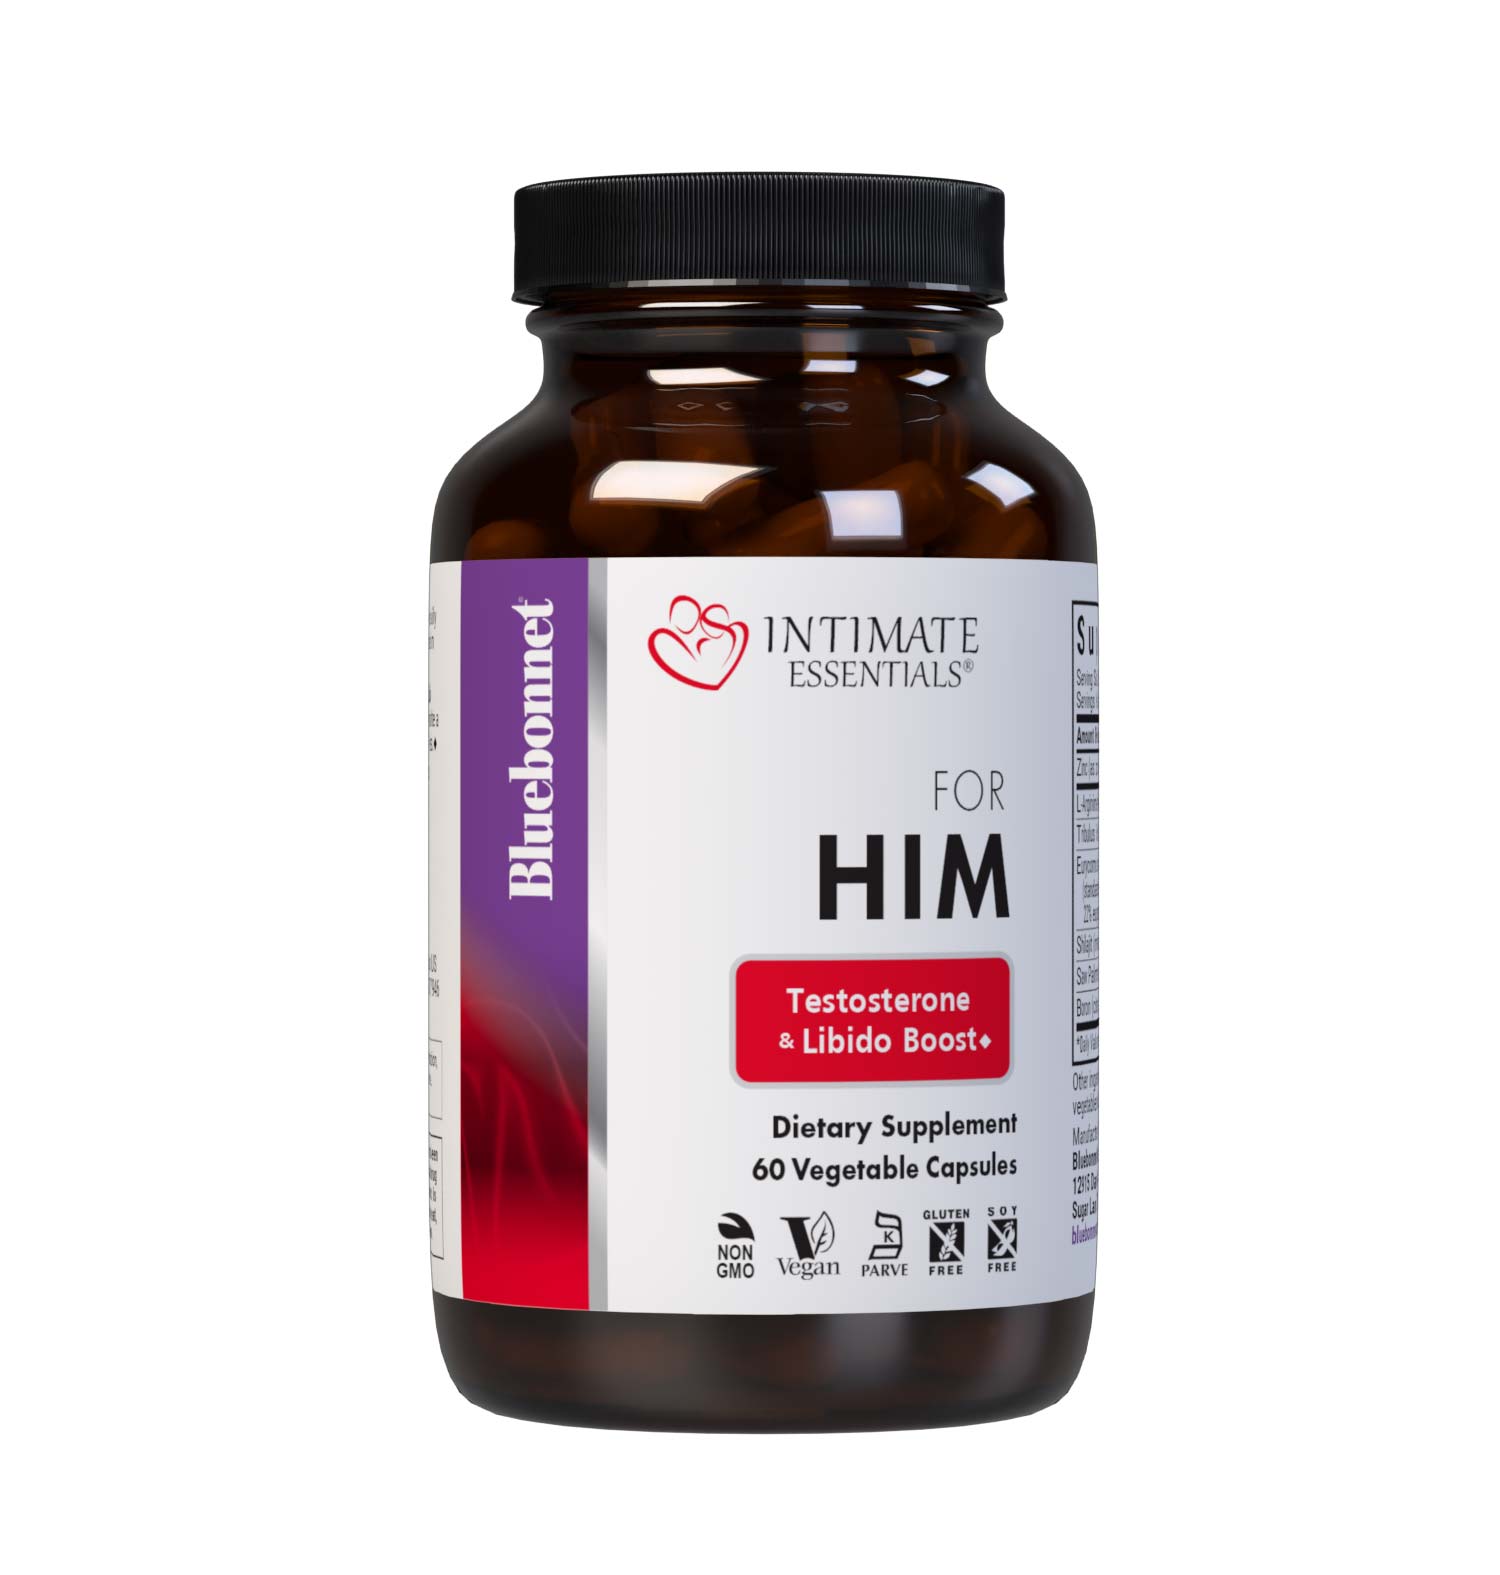 Bluebonnet’s Intimate Essentials For Him Testosterone & Libido Boost Vegetable Capsules are specially formulated to help stimulate a man’s sexual chemistry by amplifying testosterone and libido levels.  #size_60 count